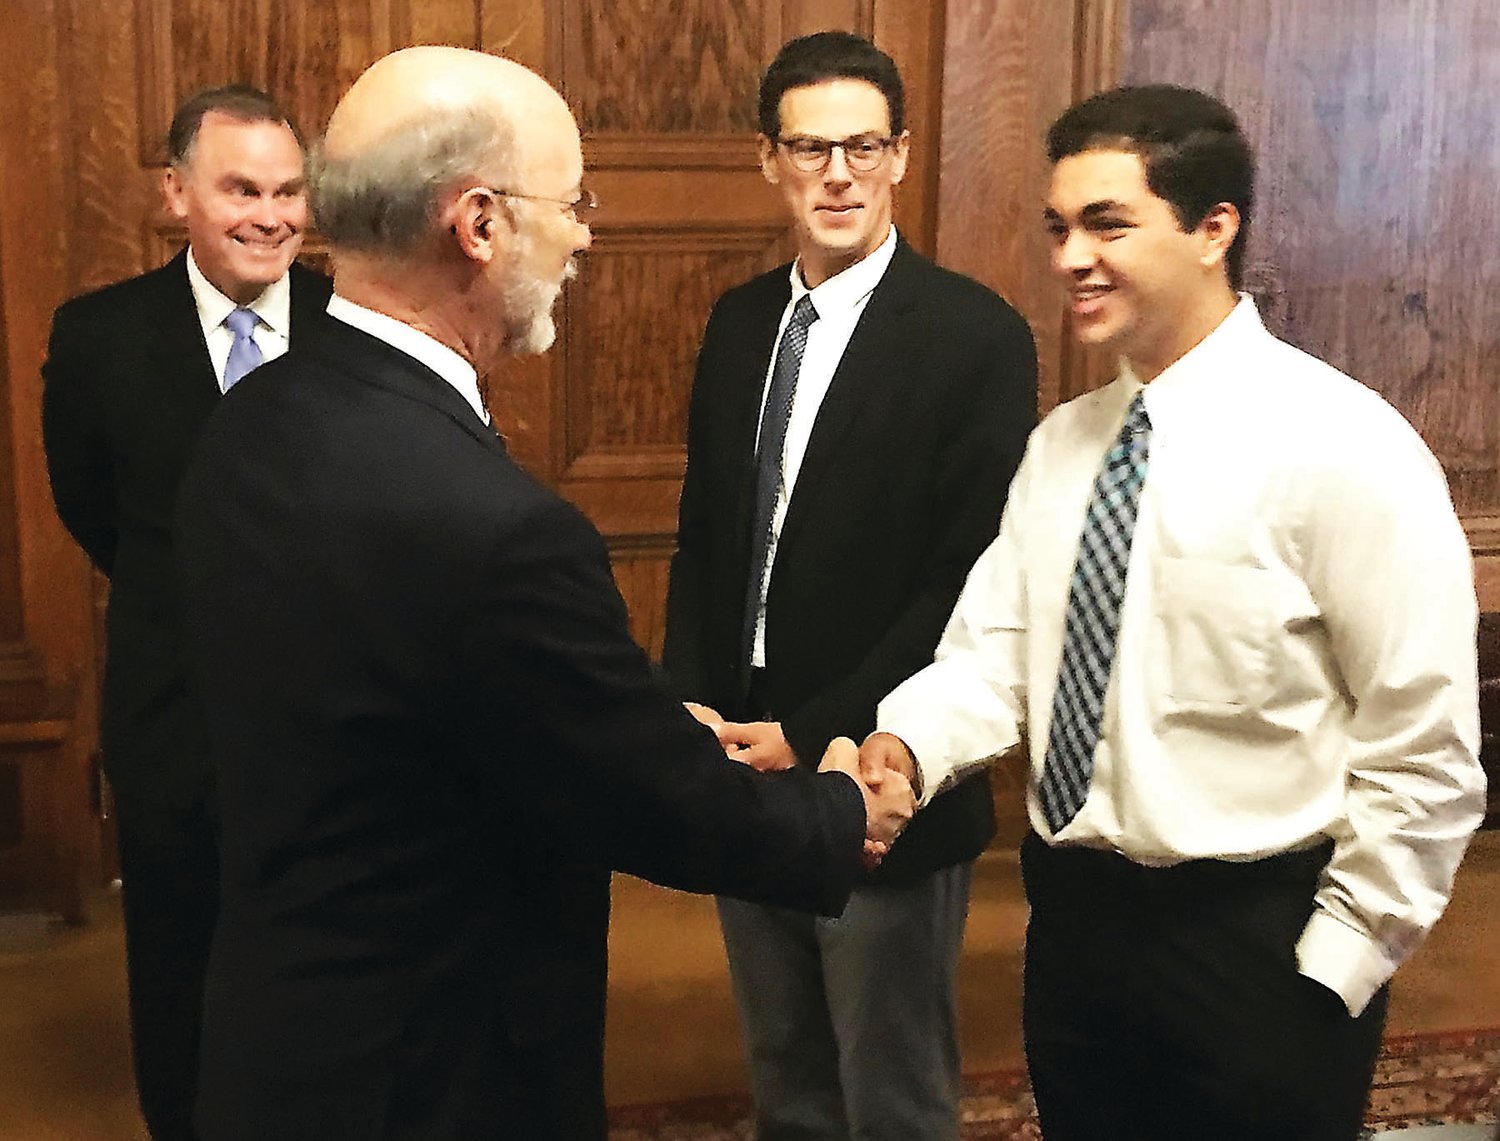 Gov. Tom Wolf shakes hands with Quakertown AP Government student Andrew Labeeb as Superintendent Dr. Bill Harner, left, and Trumbauersville Elementary School Principal Adam Schmucker look on.